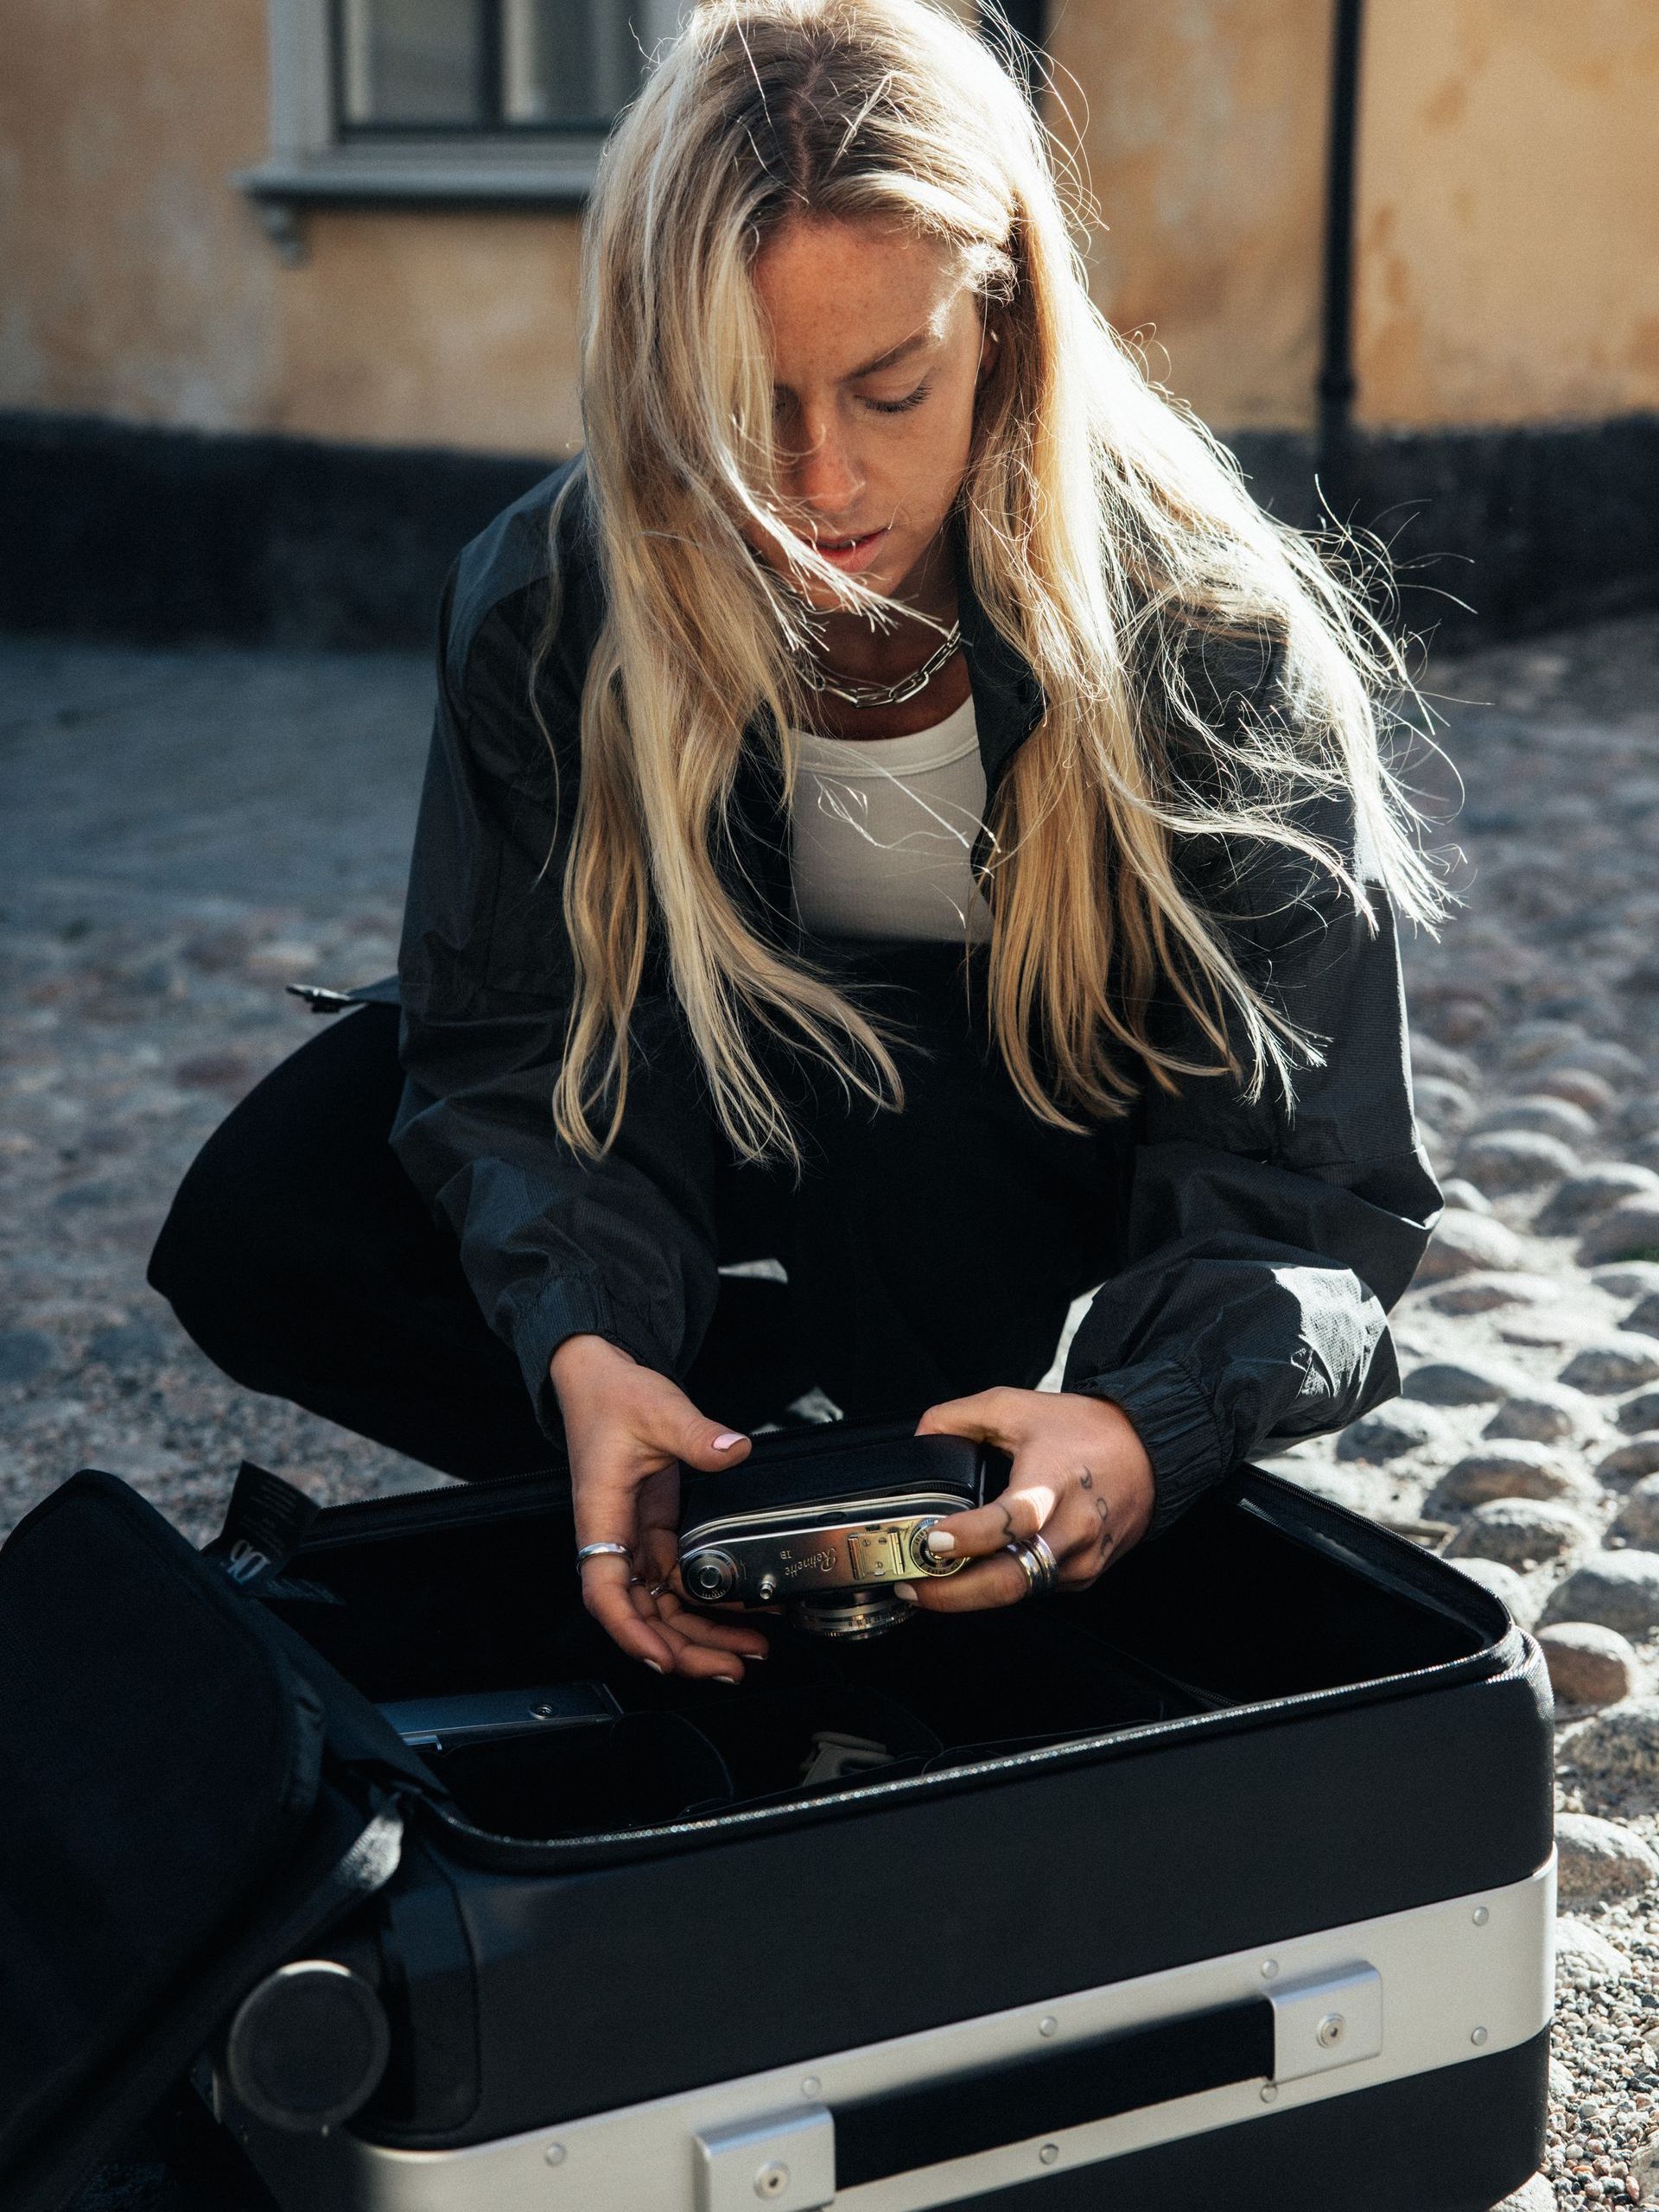 woman with blonde hair getting a camera out of a black suitcase